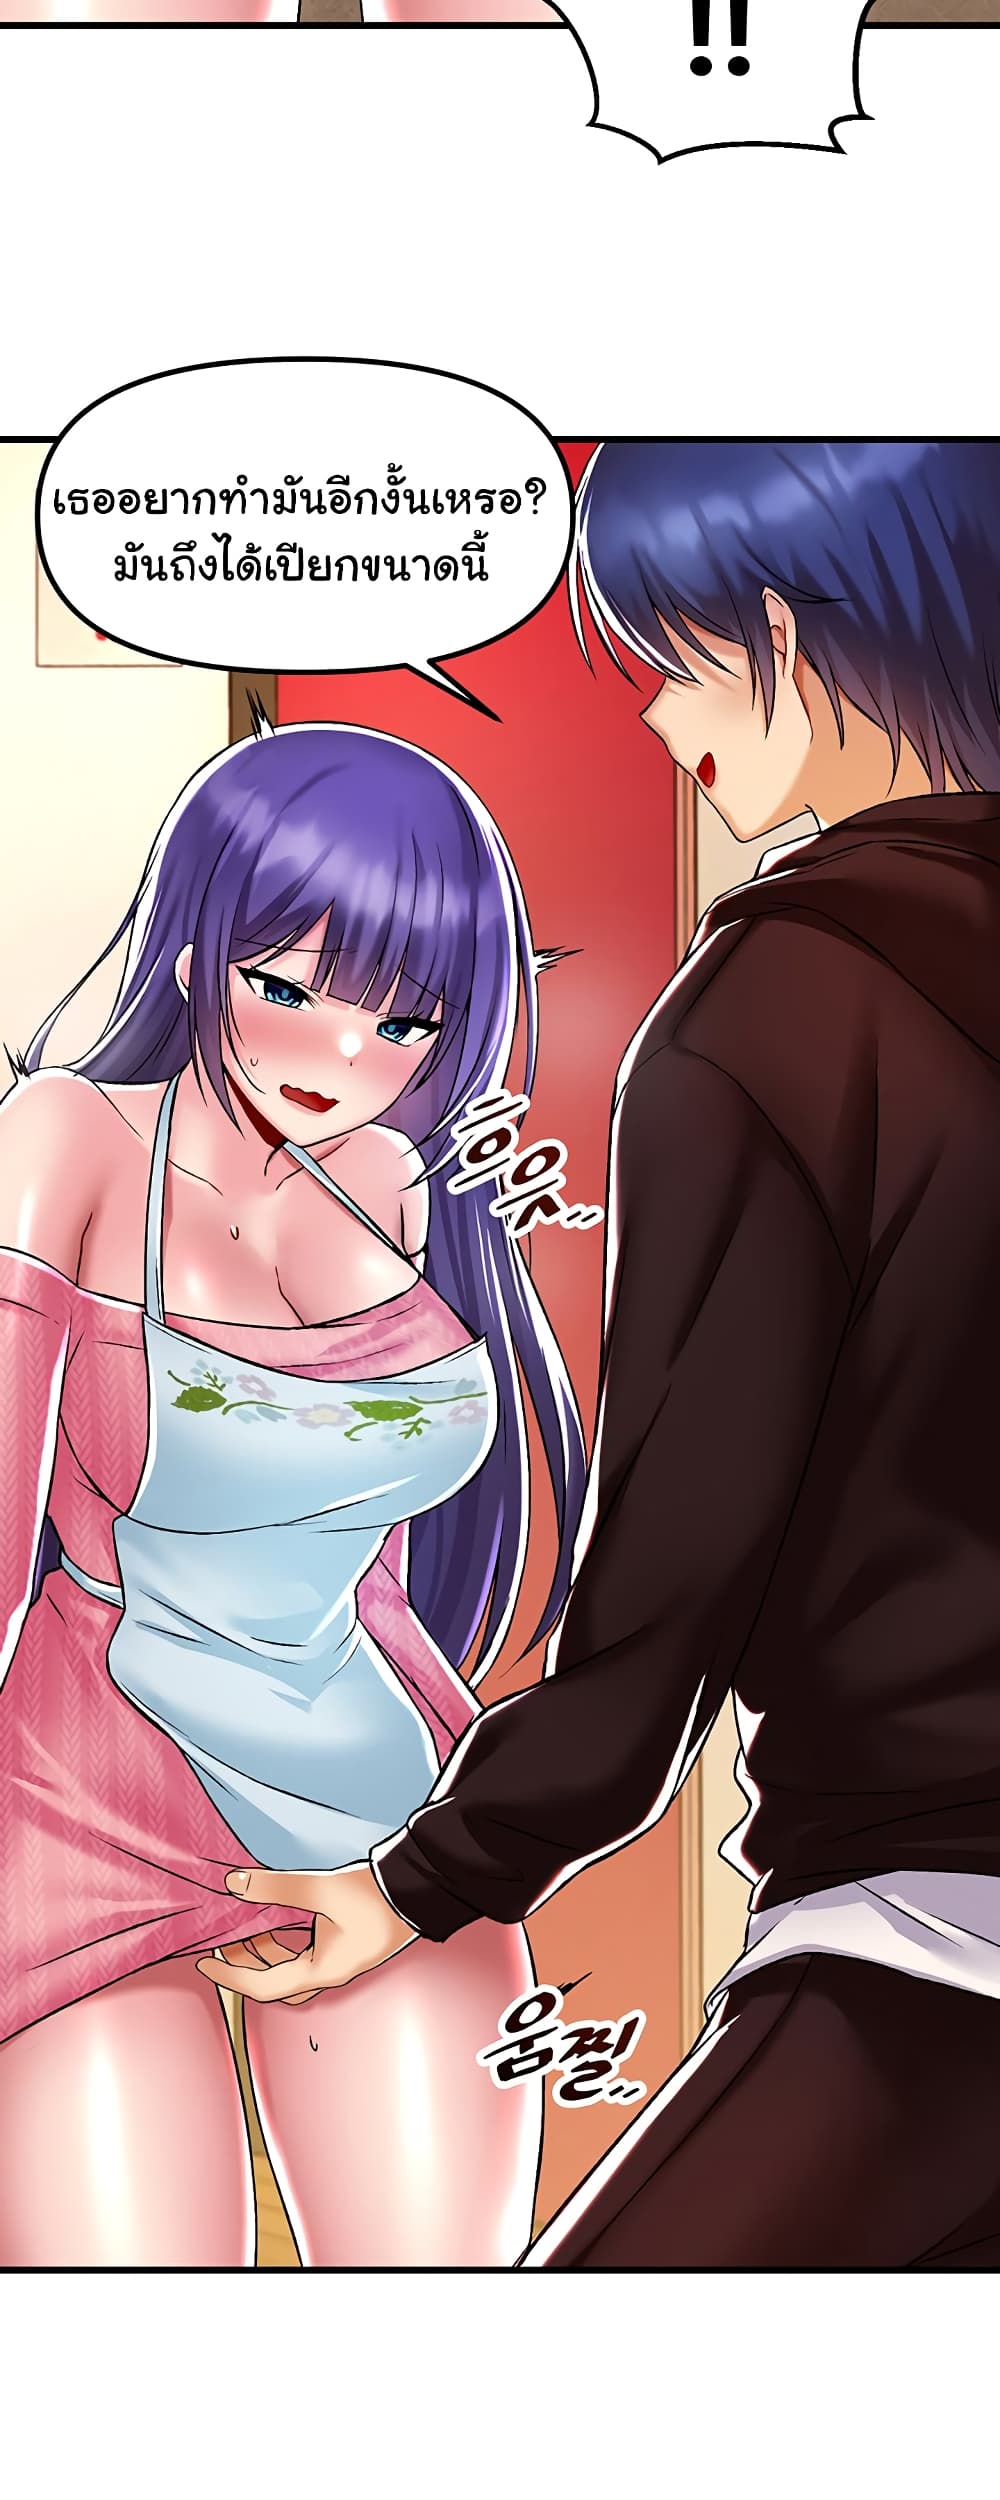 Trapped in the Academy’s Eroge 37-37